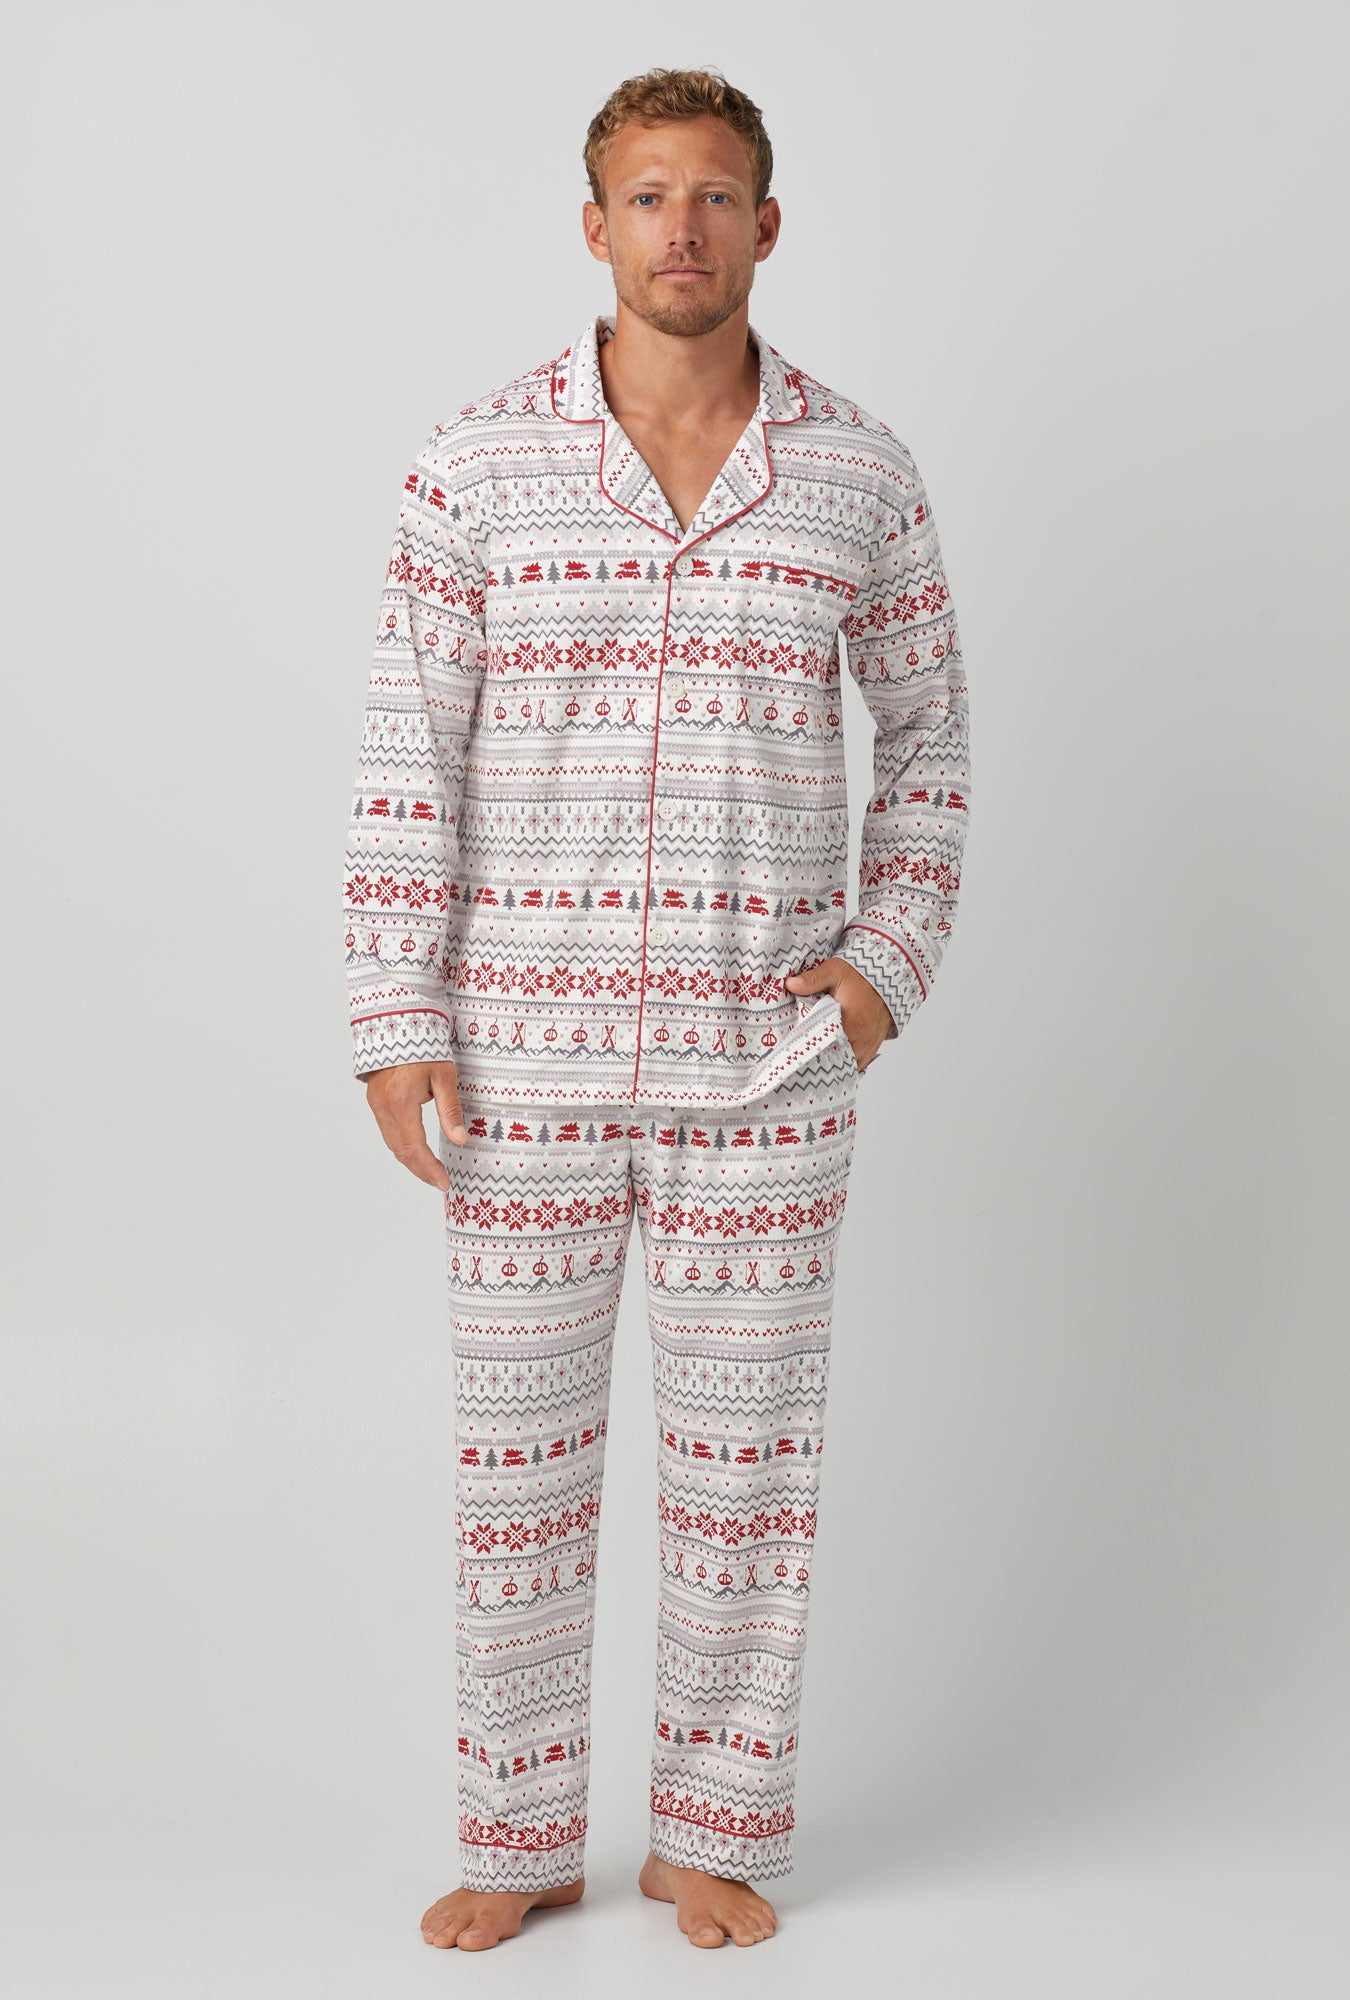 A man wearing white Long Sleeve Classic Stretch Jersey PJ Set  with Alpine Fair print